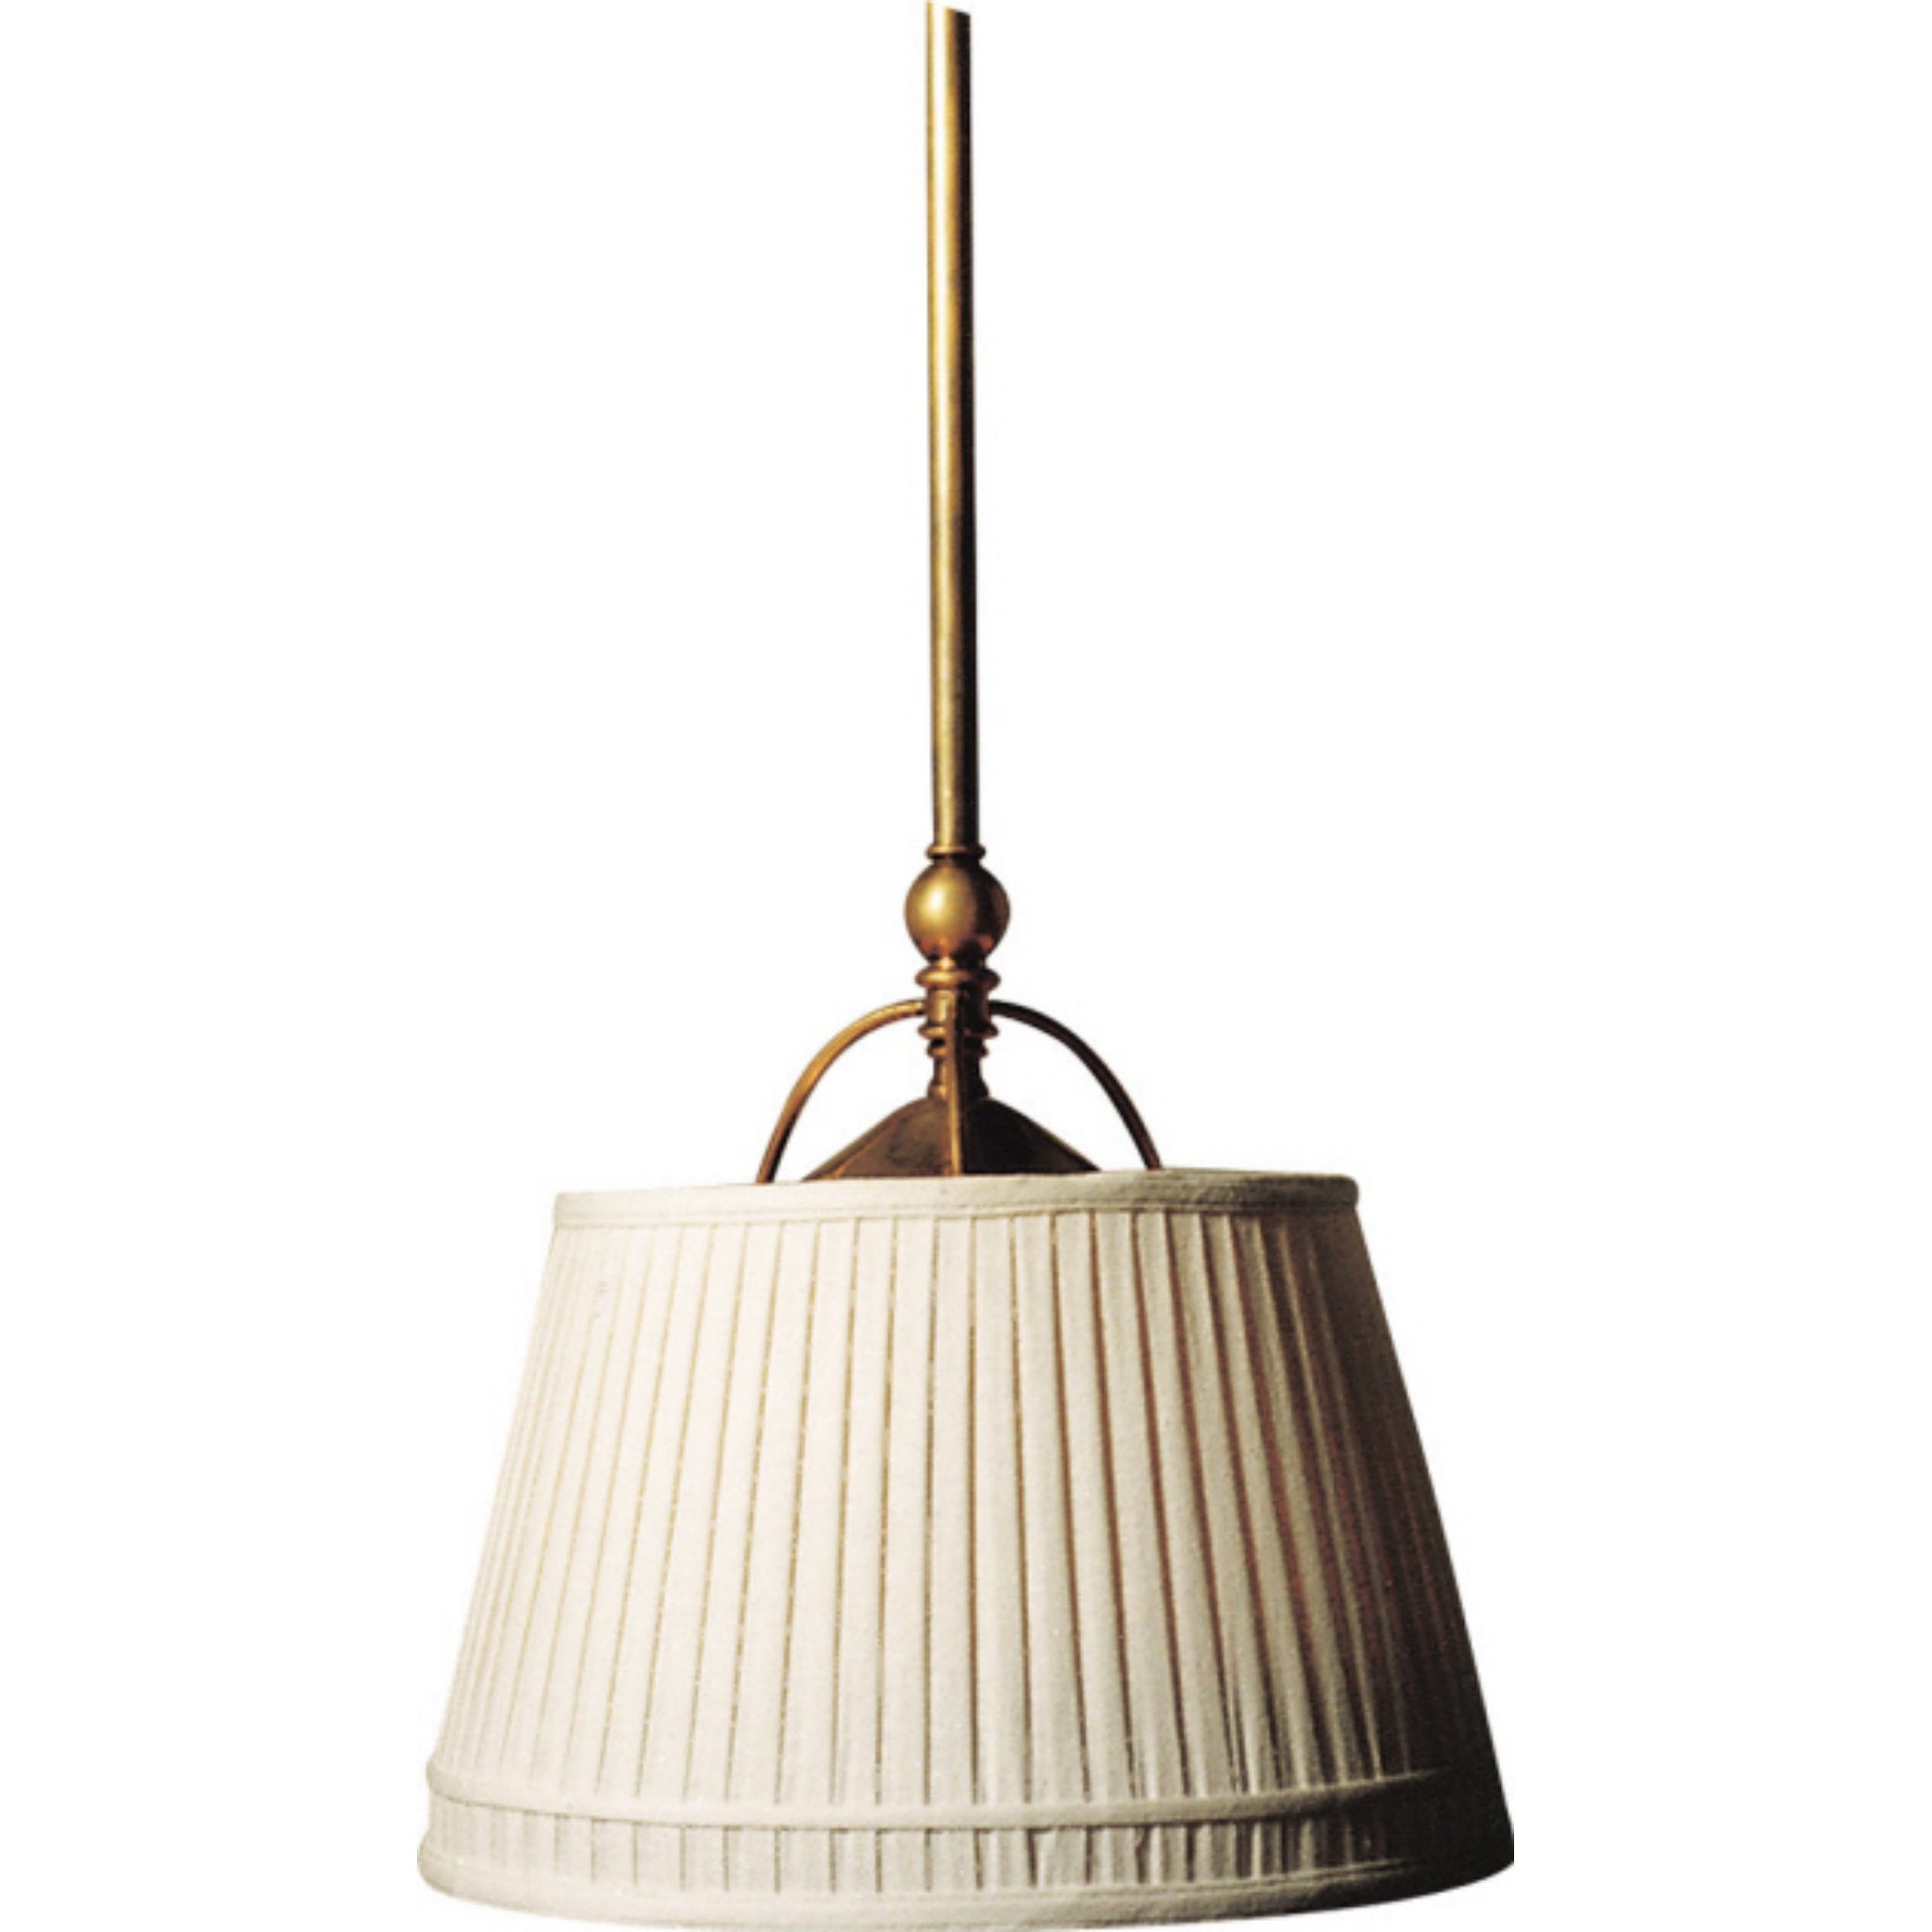 Chapman & Myers Sloane Single Shop Light in Antique-Burnished Brass with Linen Shade